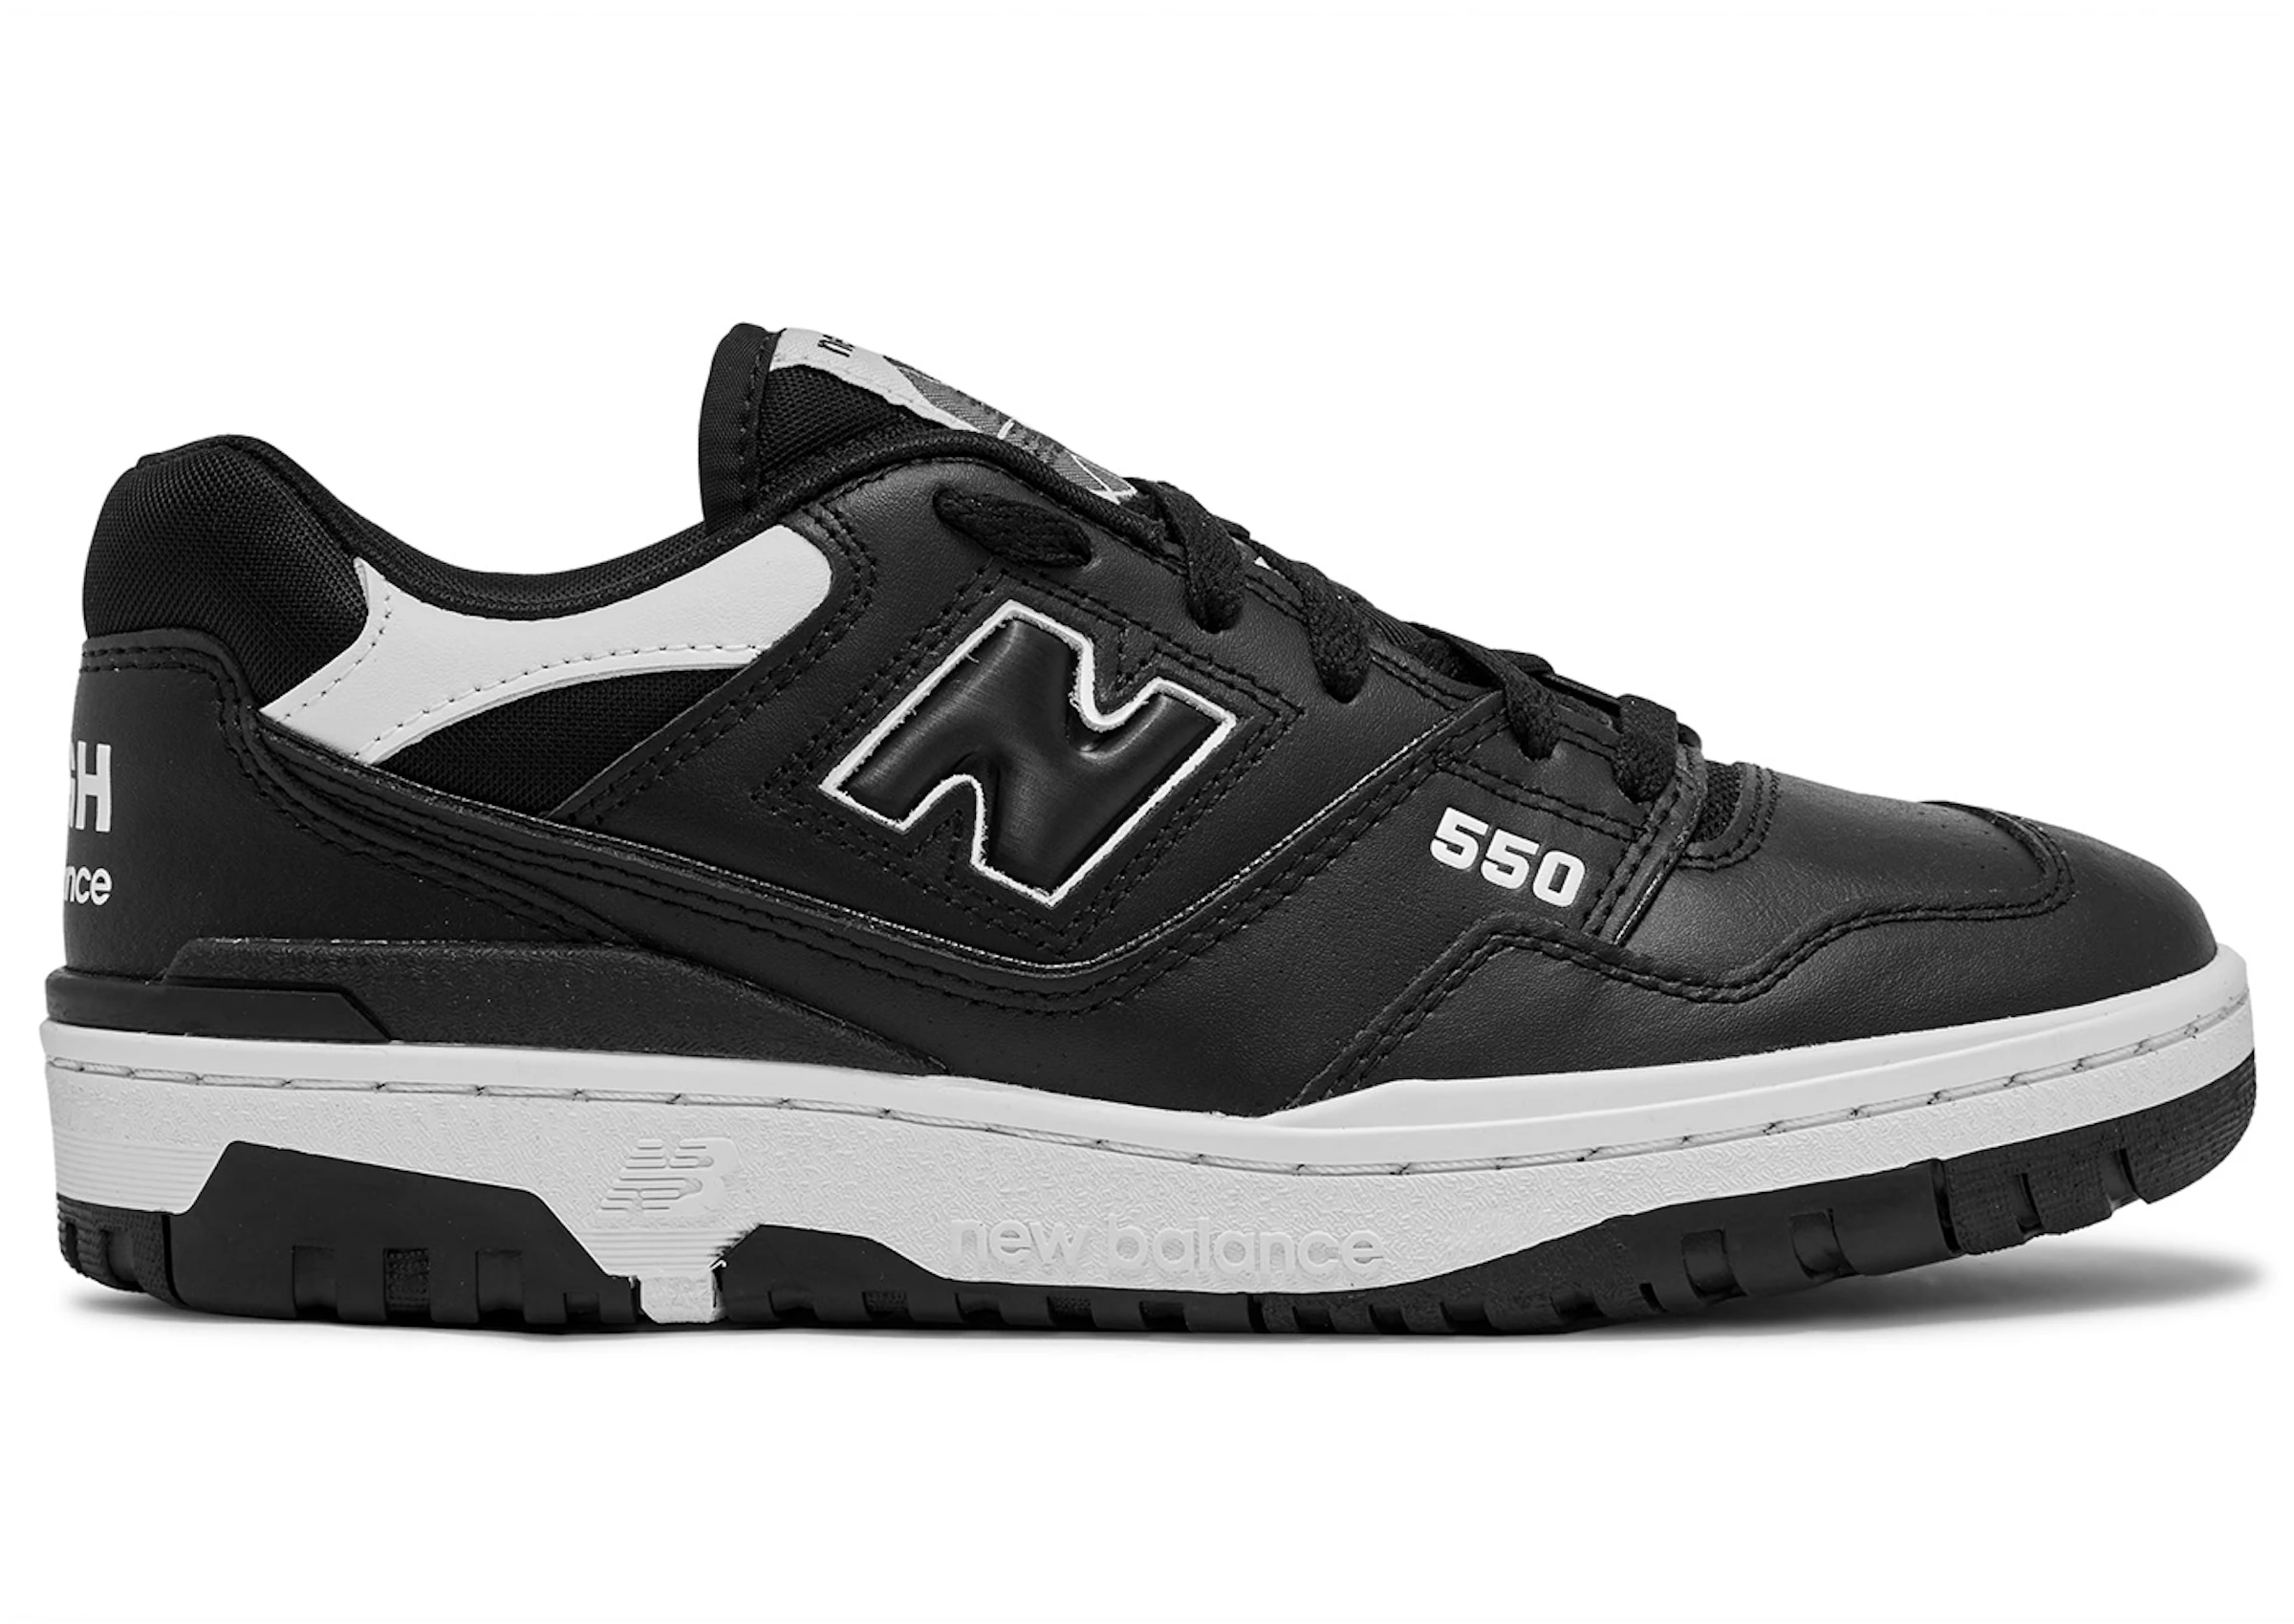 New Balance Homme Shoes | lupon.gov.ph